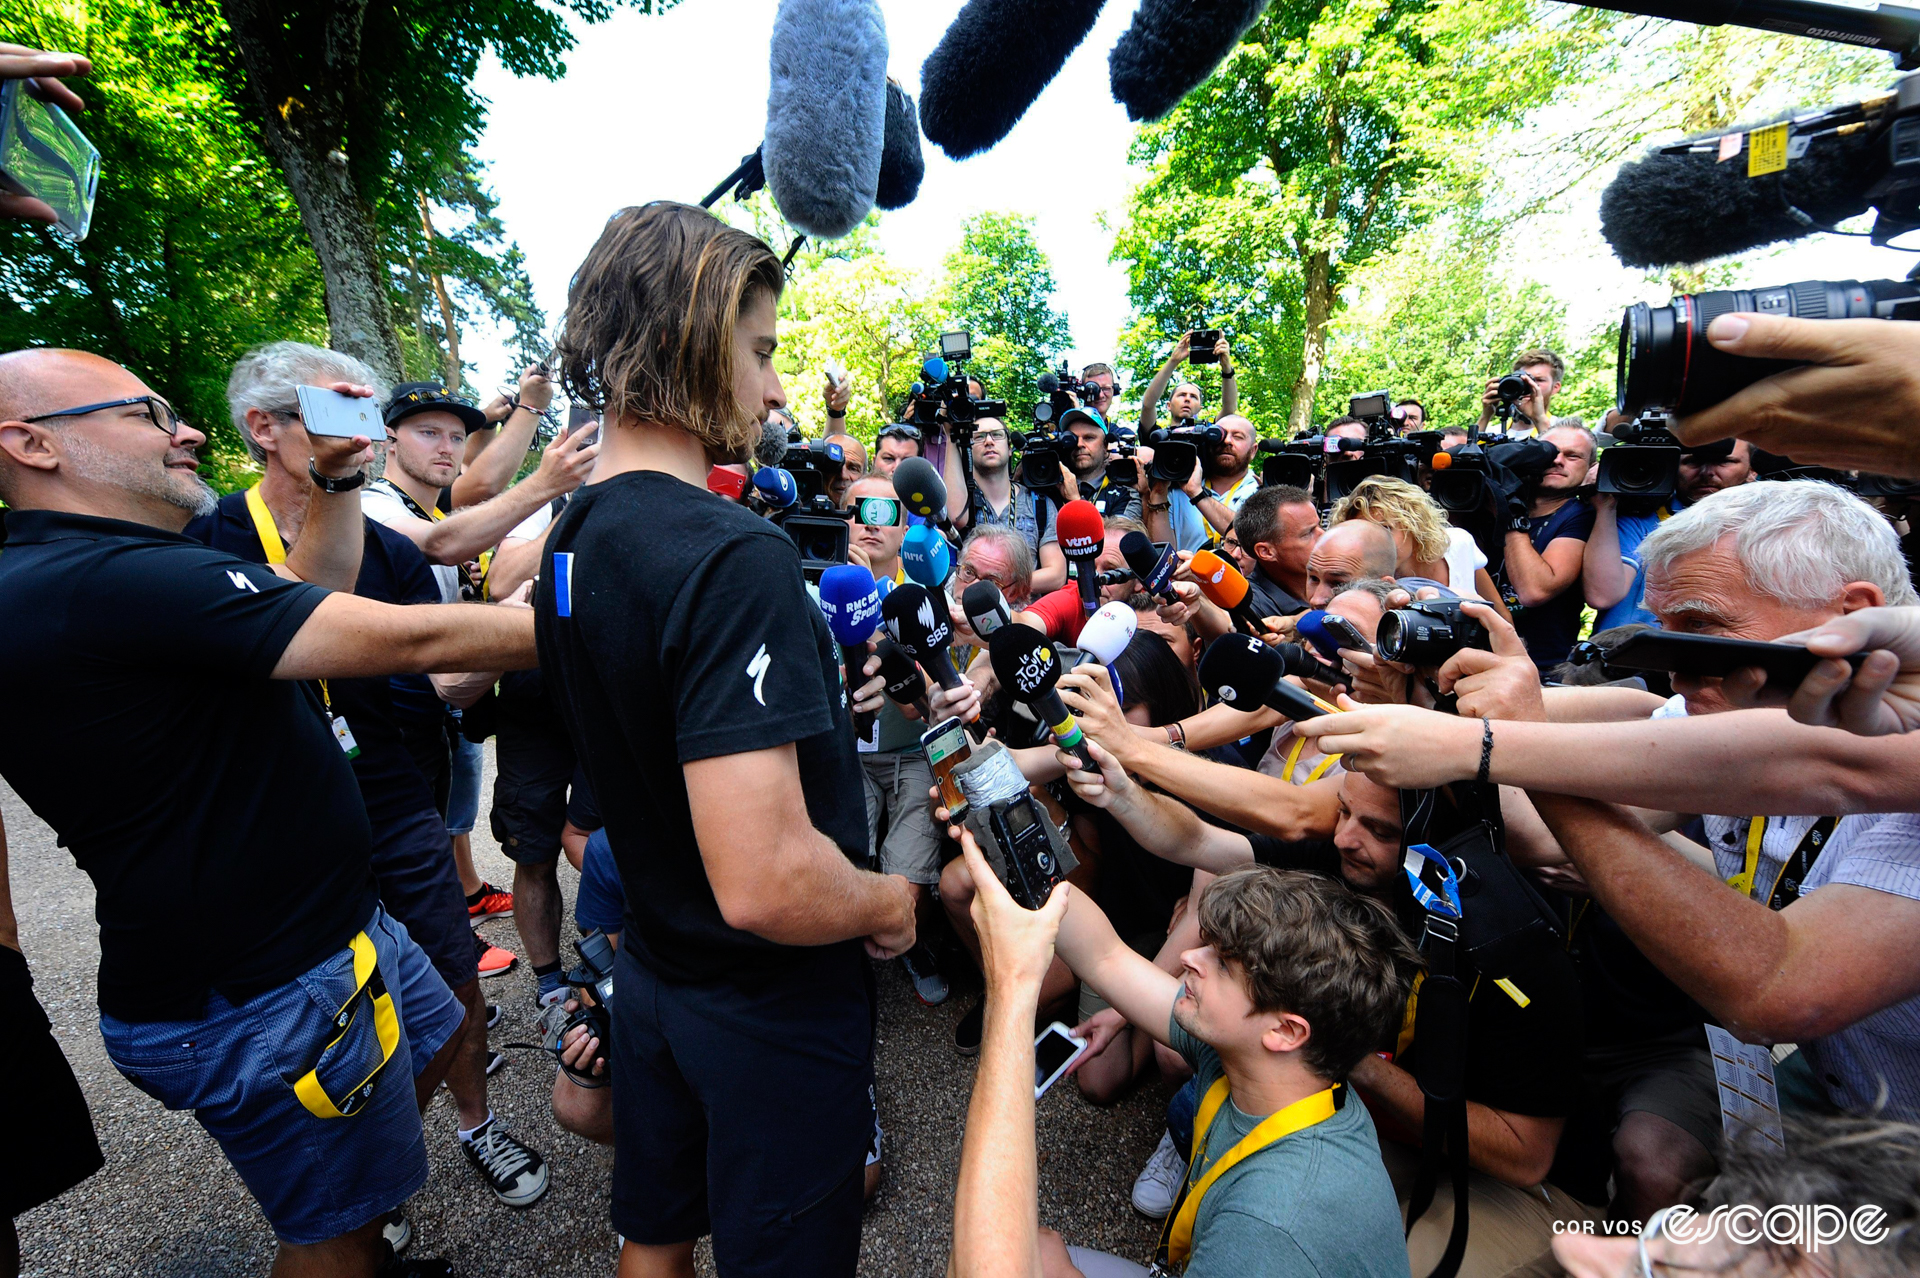 Peter Sagan addresses a large throng of media personnel a day after being disqualified from the race.